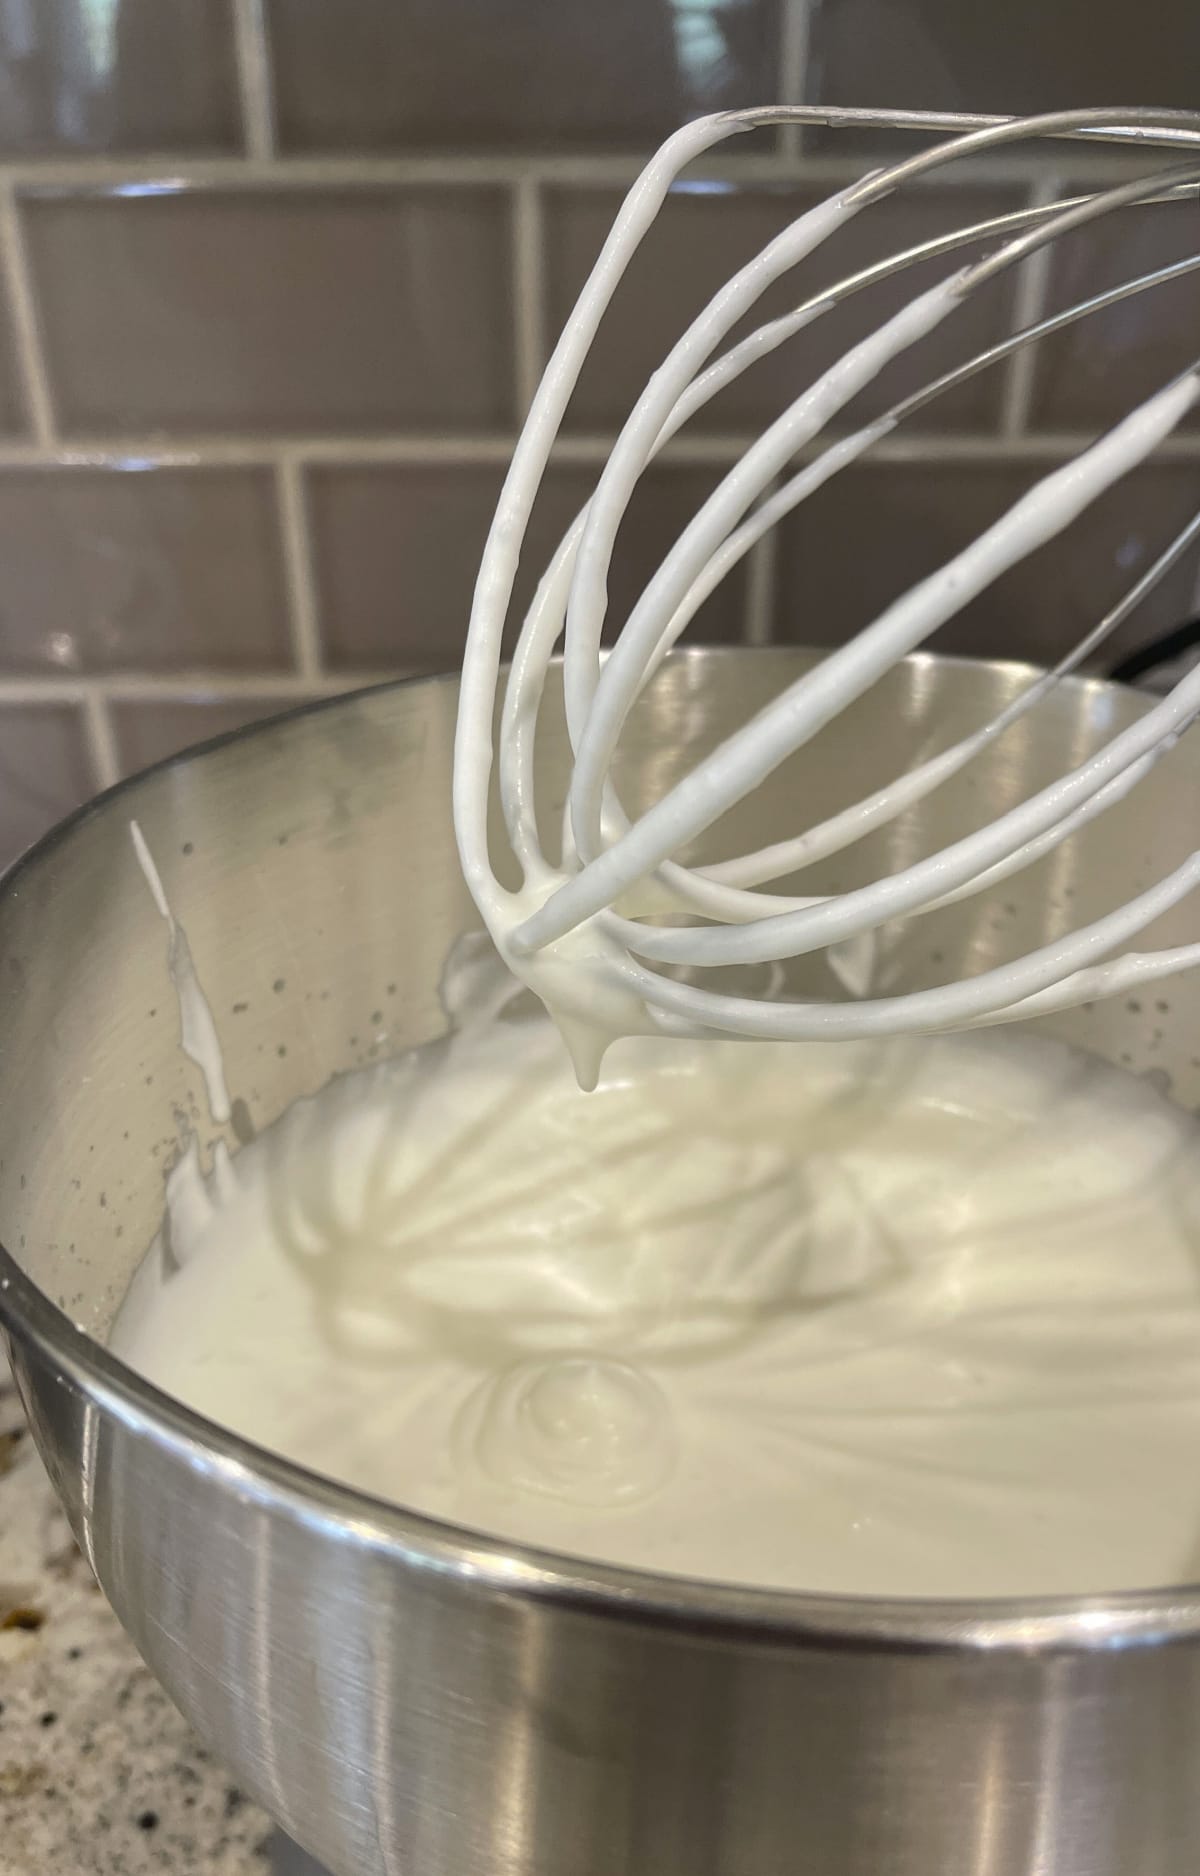 whipped cream consistency after whisking